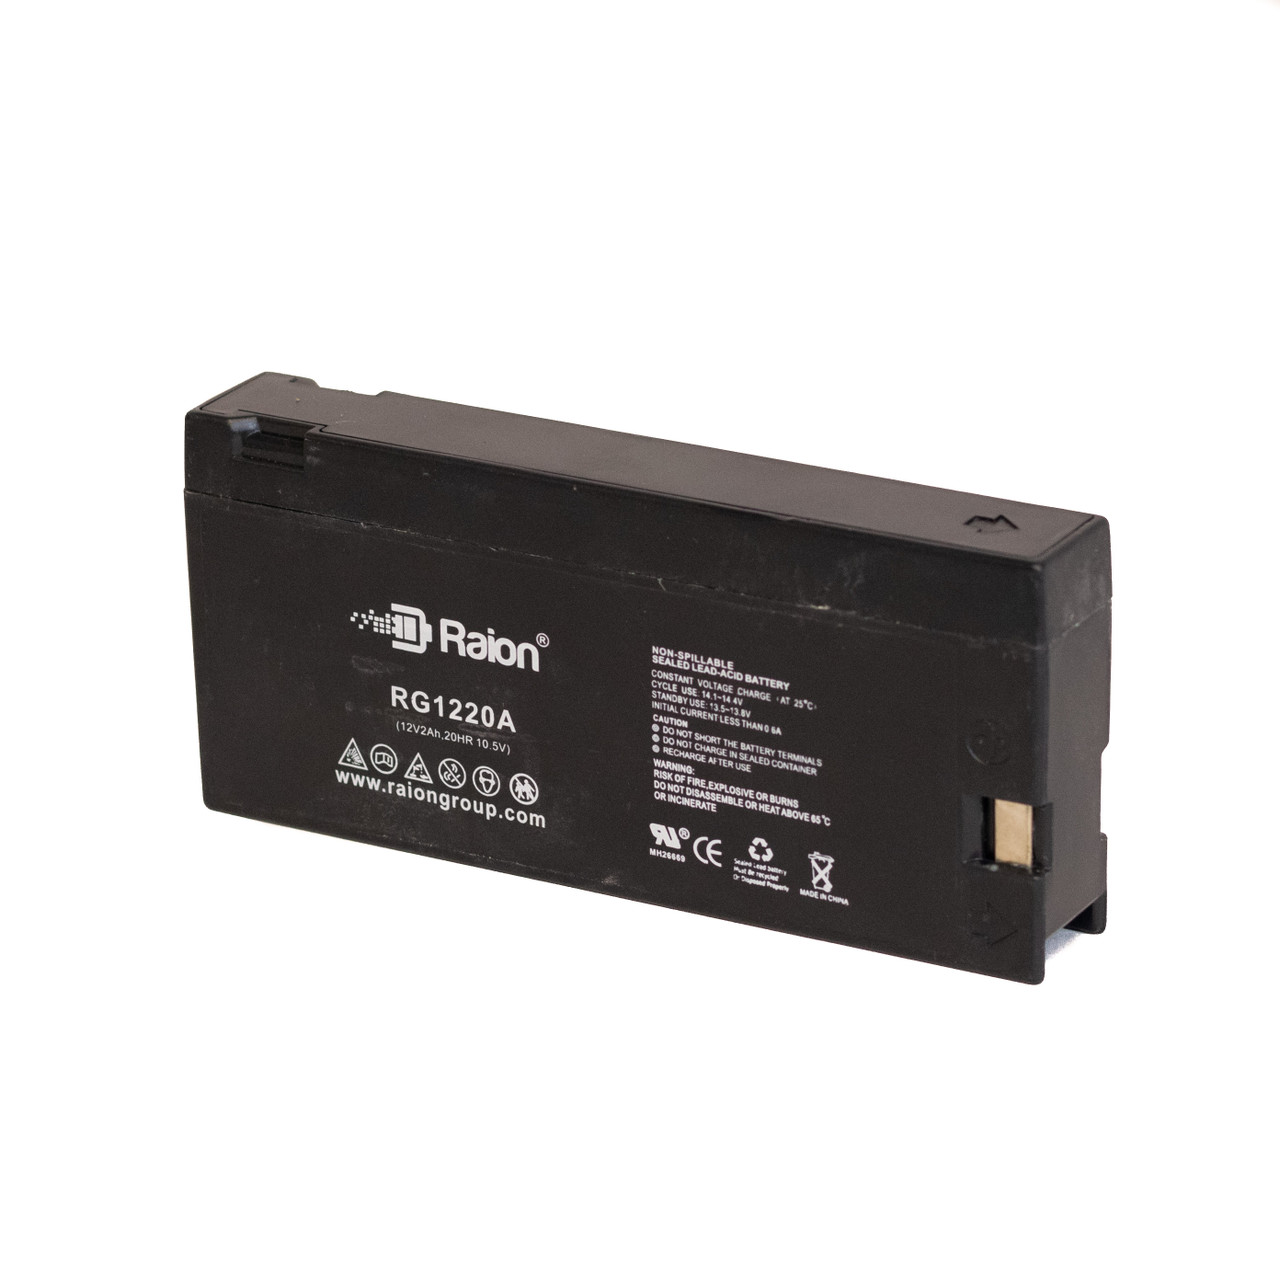 Raion Power RG1220A Replacement Battery for Sylvania V80096BK01